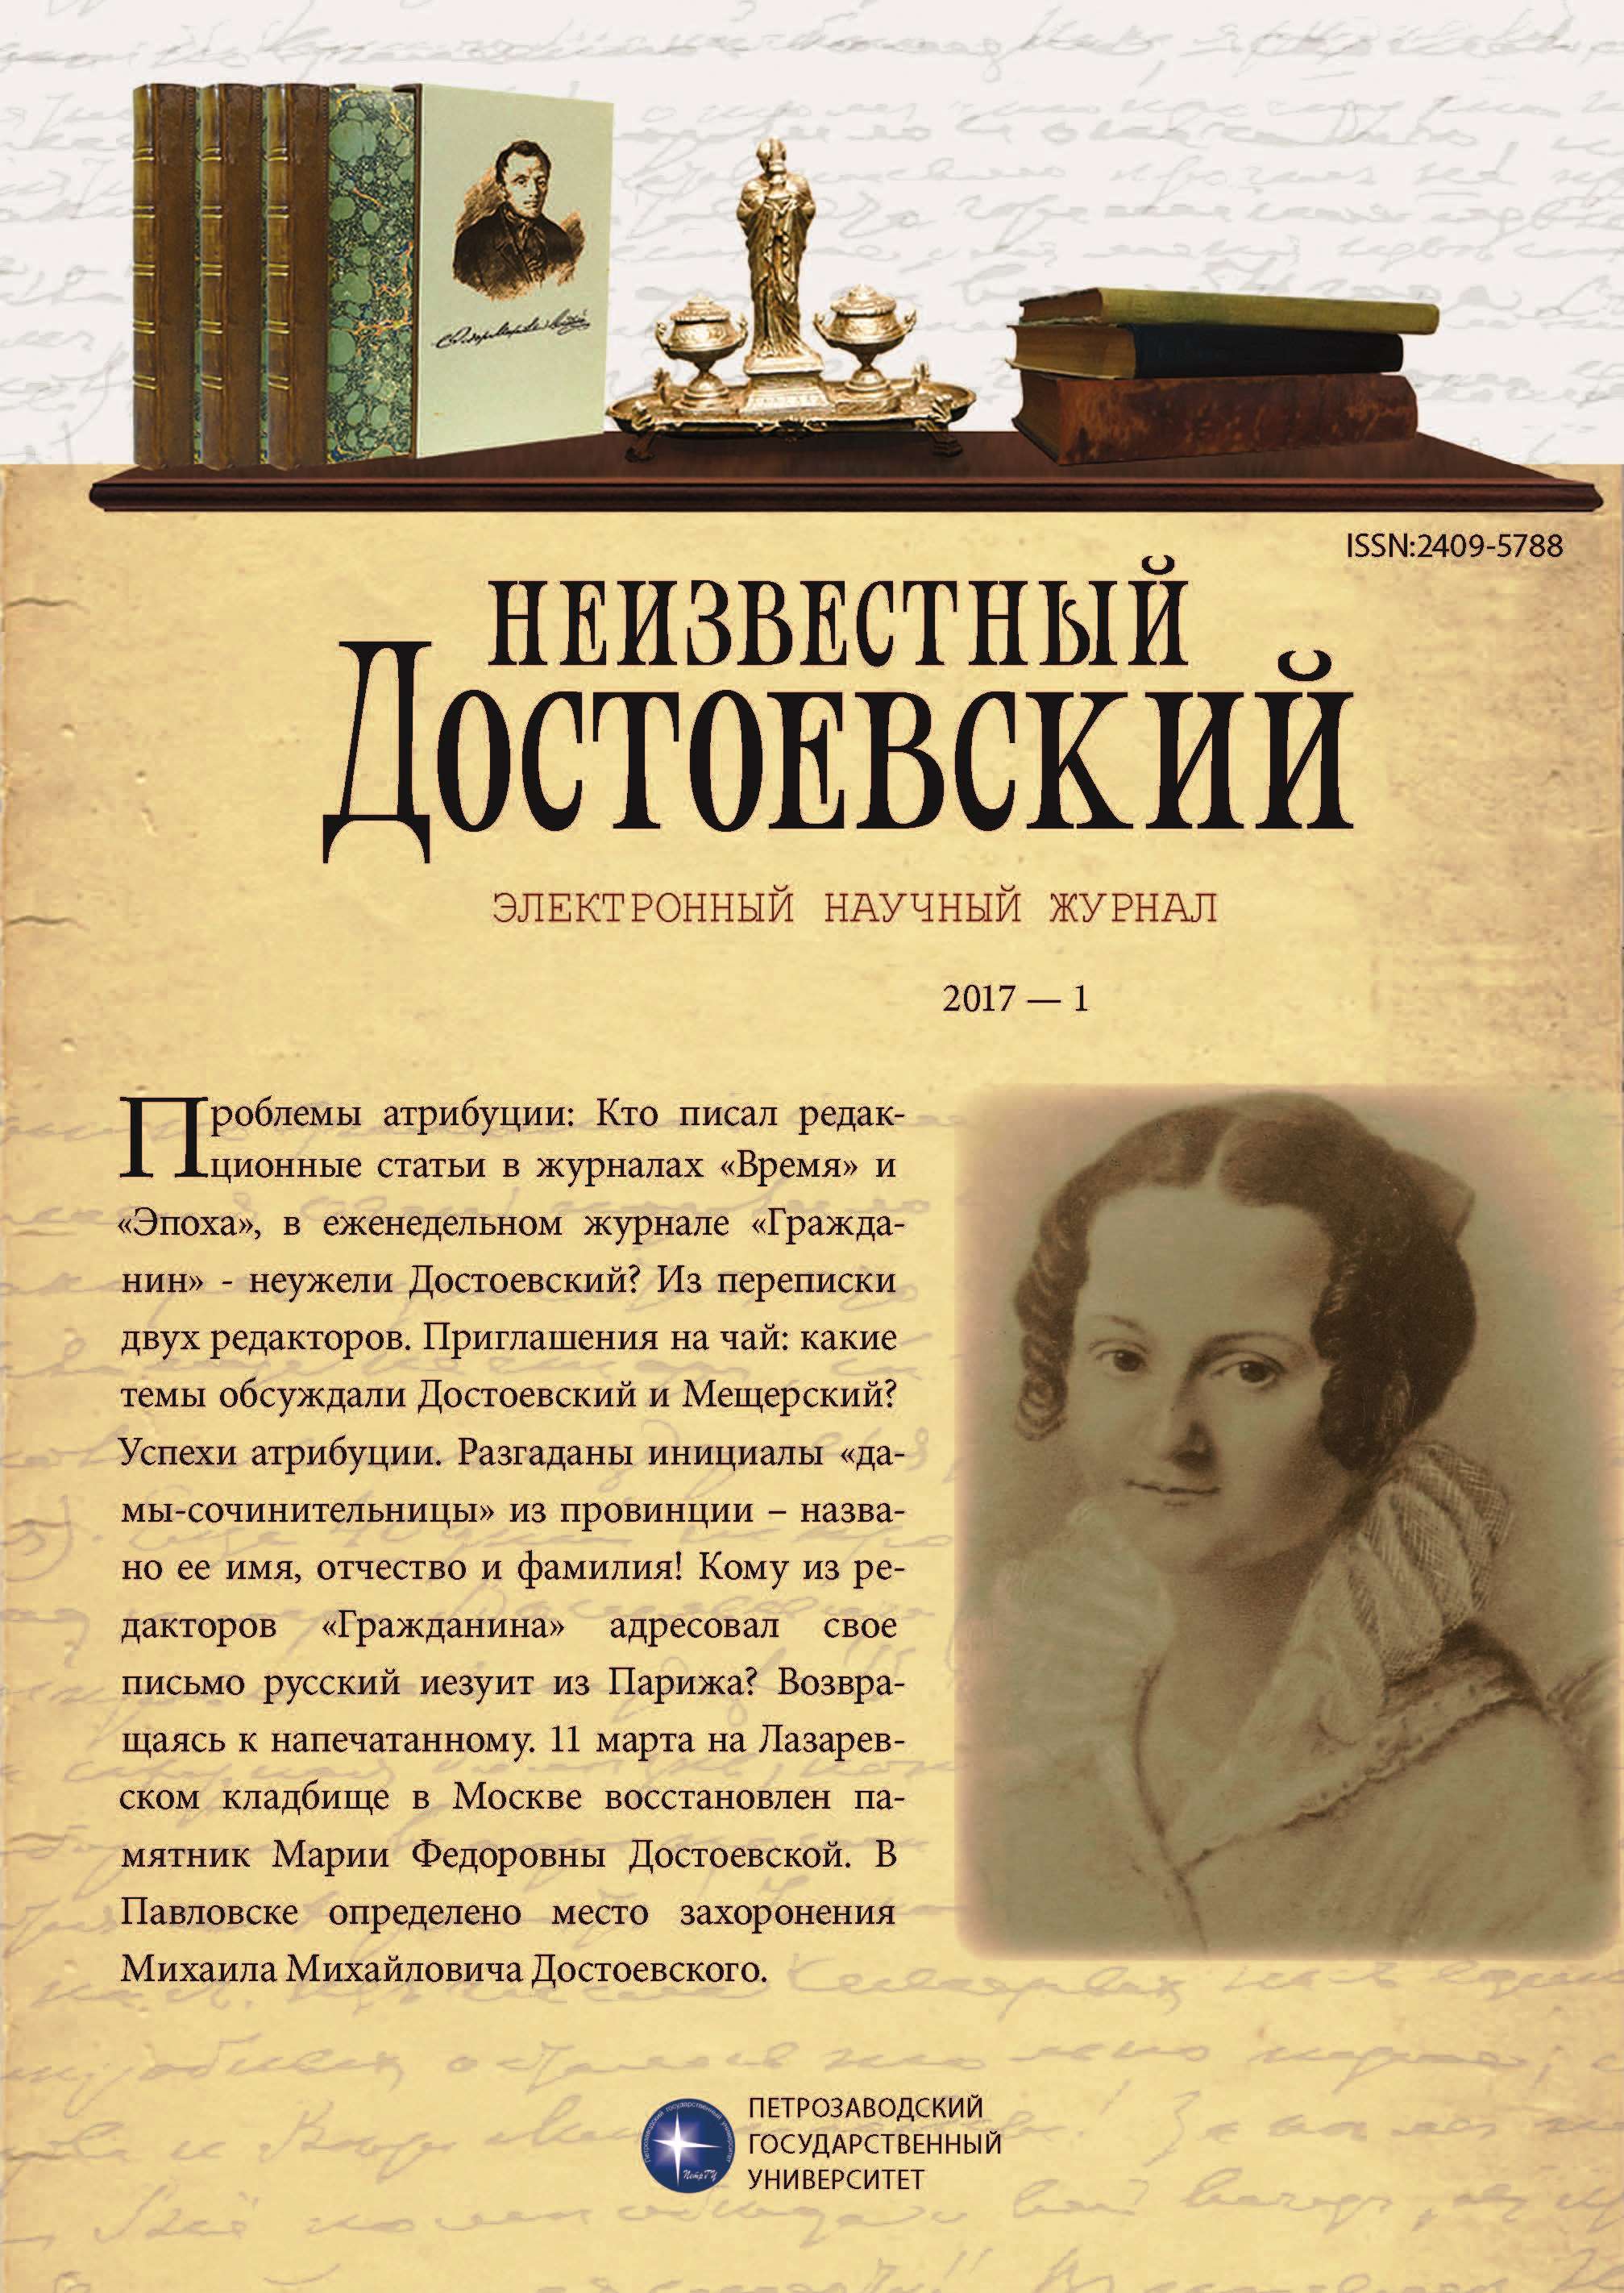 From the Speeches of the Participants of a Press Conference Conference dedicated to the restoration of the gravestone on the tomb of F.M. Dostoevsky’s mother held on March 9, 2017 in the Dostoevsky Apartment Museum in Moscow. Cover Image